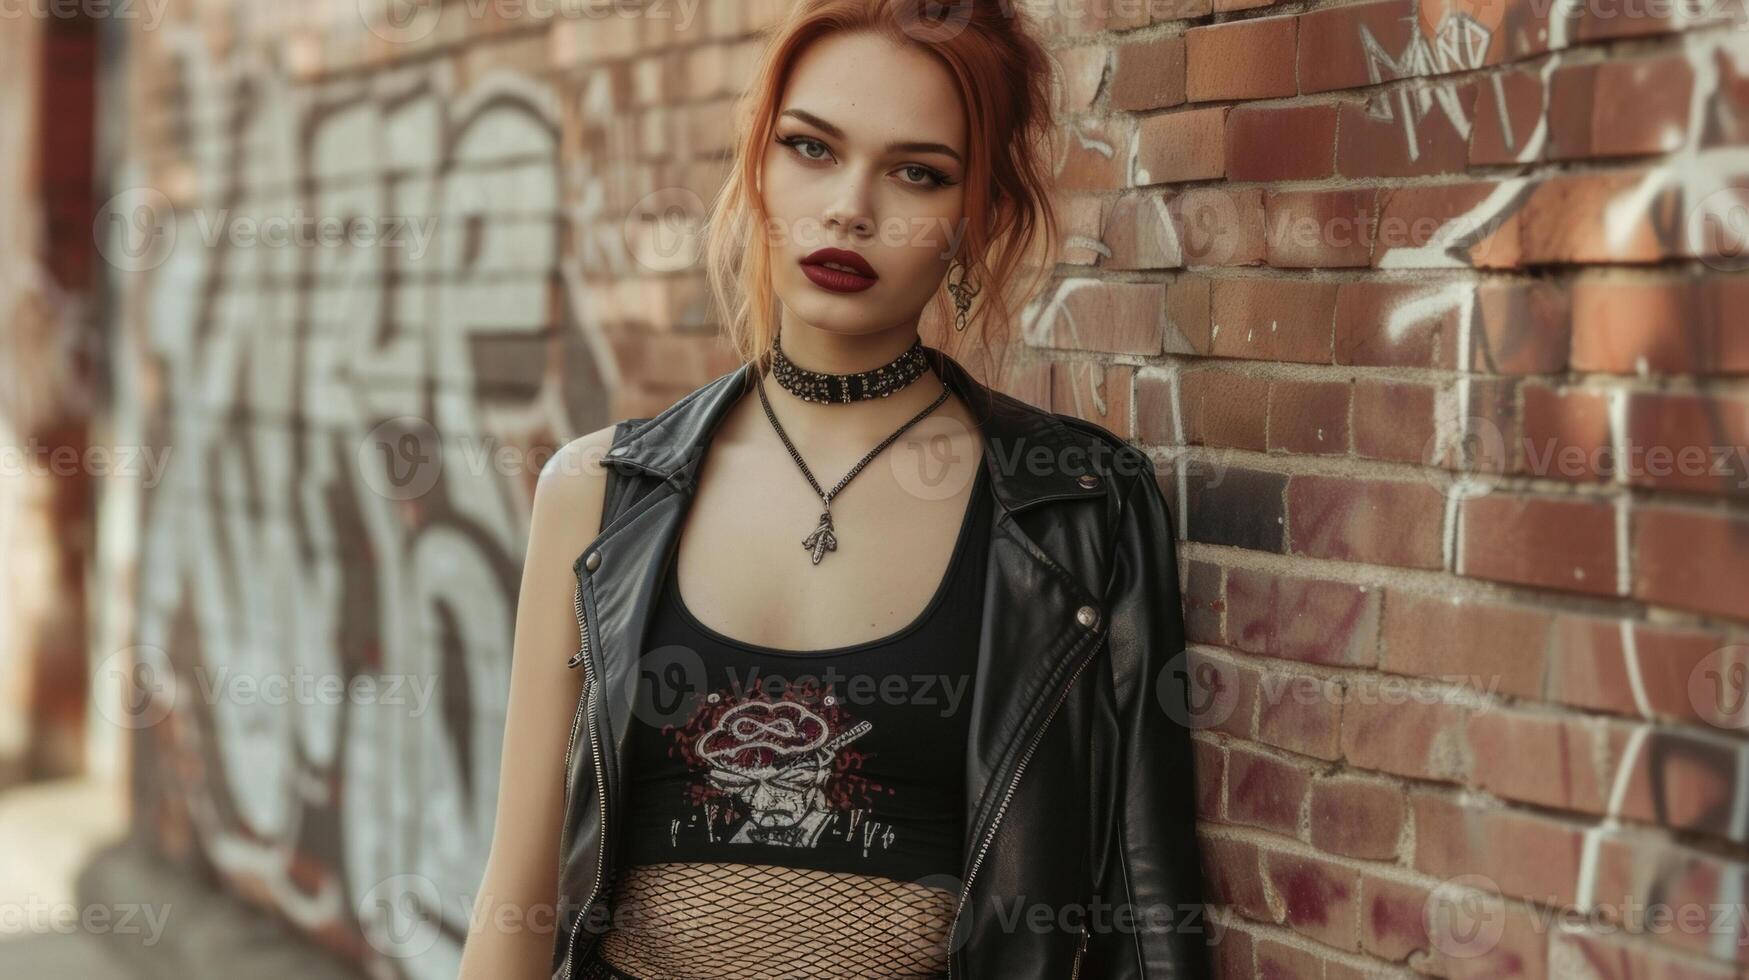 Make a statement with a bold graphic tank top ripped fishnet stockings and a leather mini skirt. Finish off this punk look with a leather jacket and a sharp cateye liner fo photo